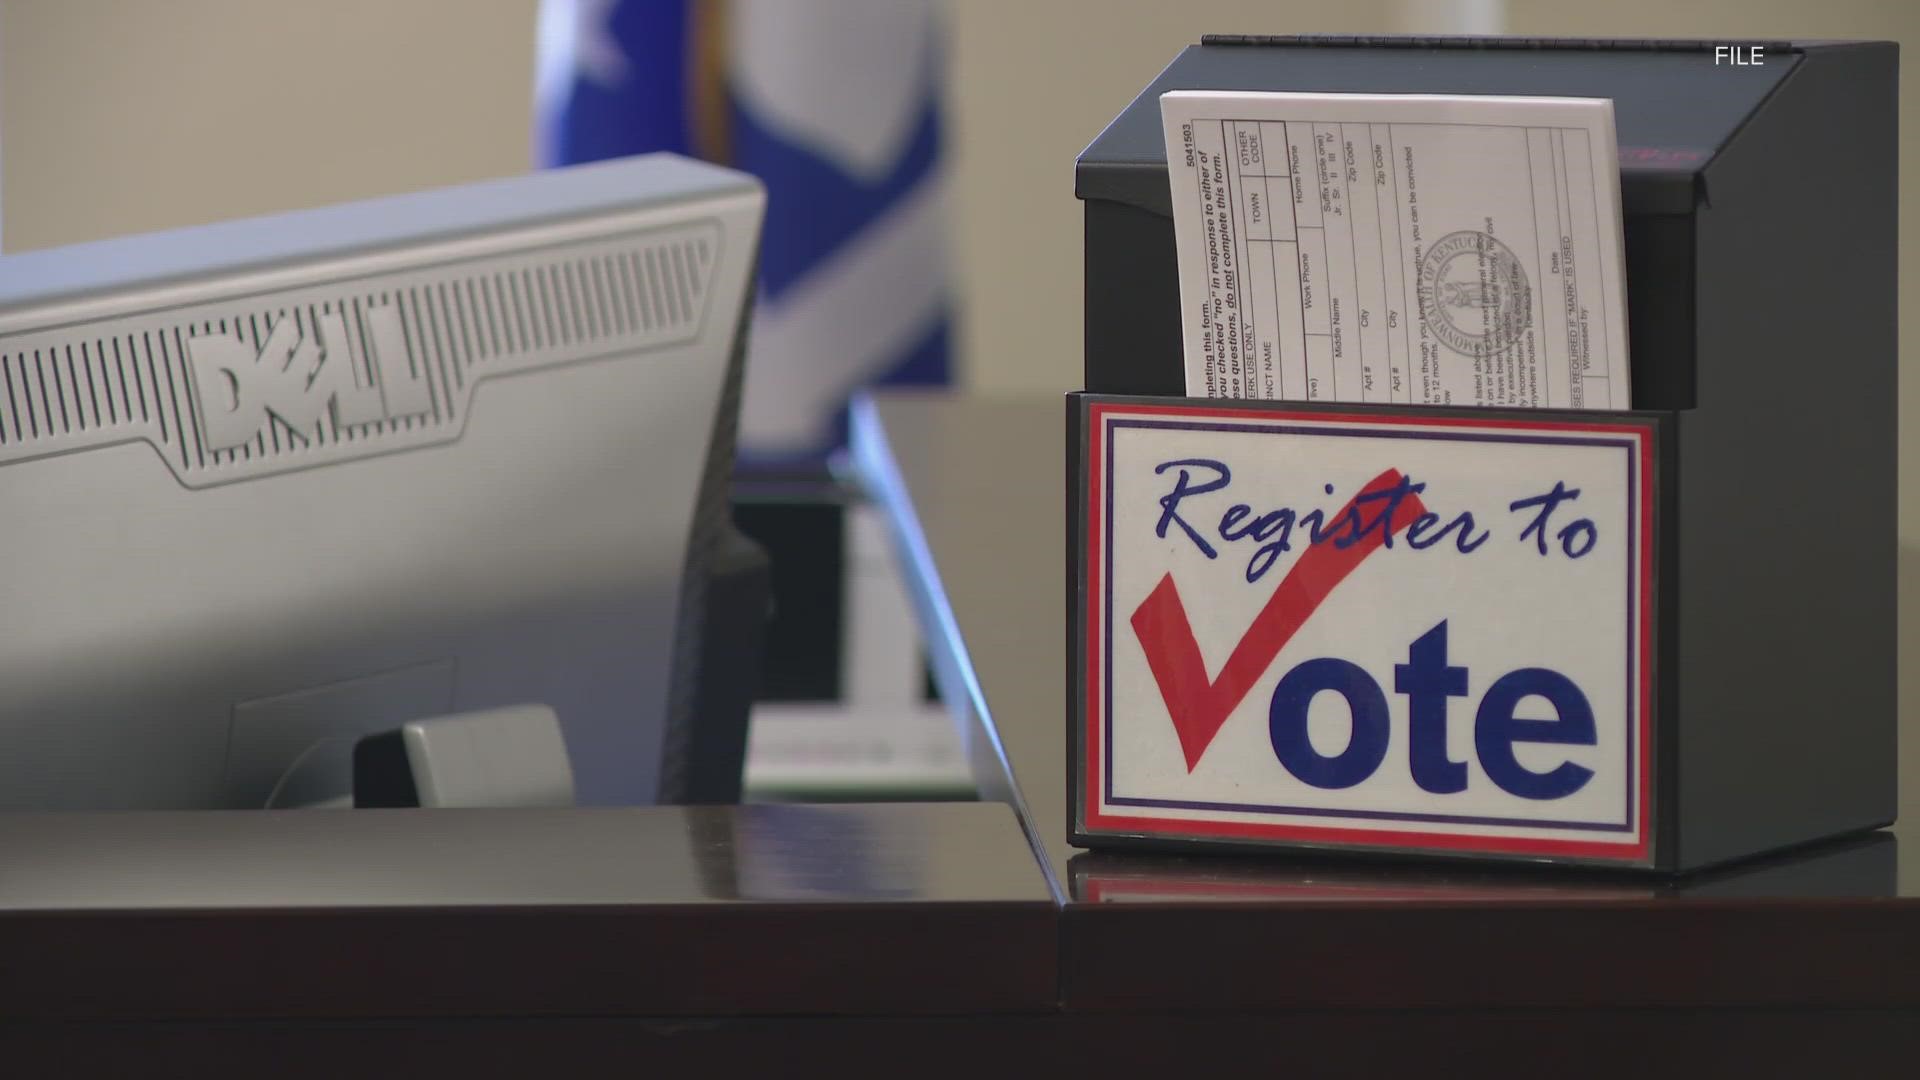 Around 100,000 voters can participate in the special election for the District 19 Senate seat.